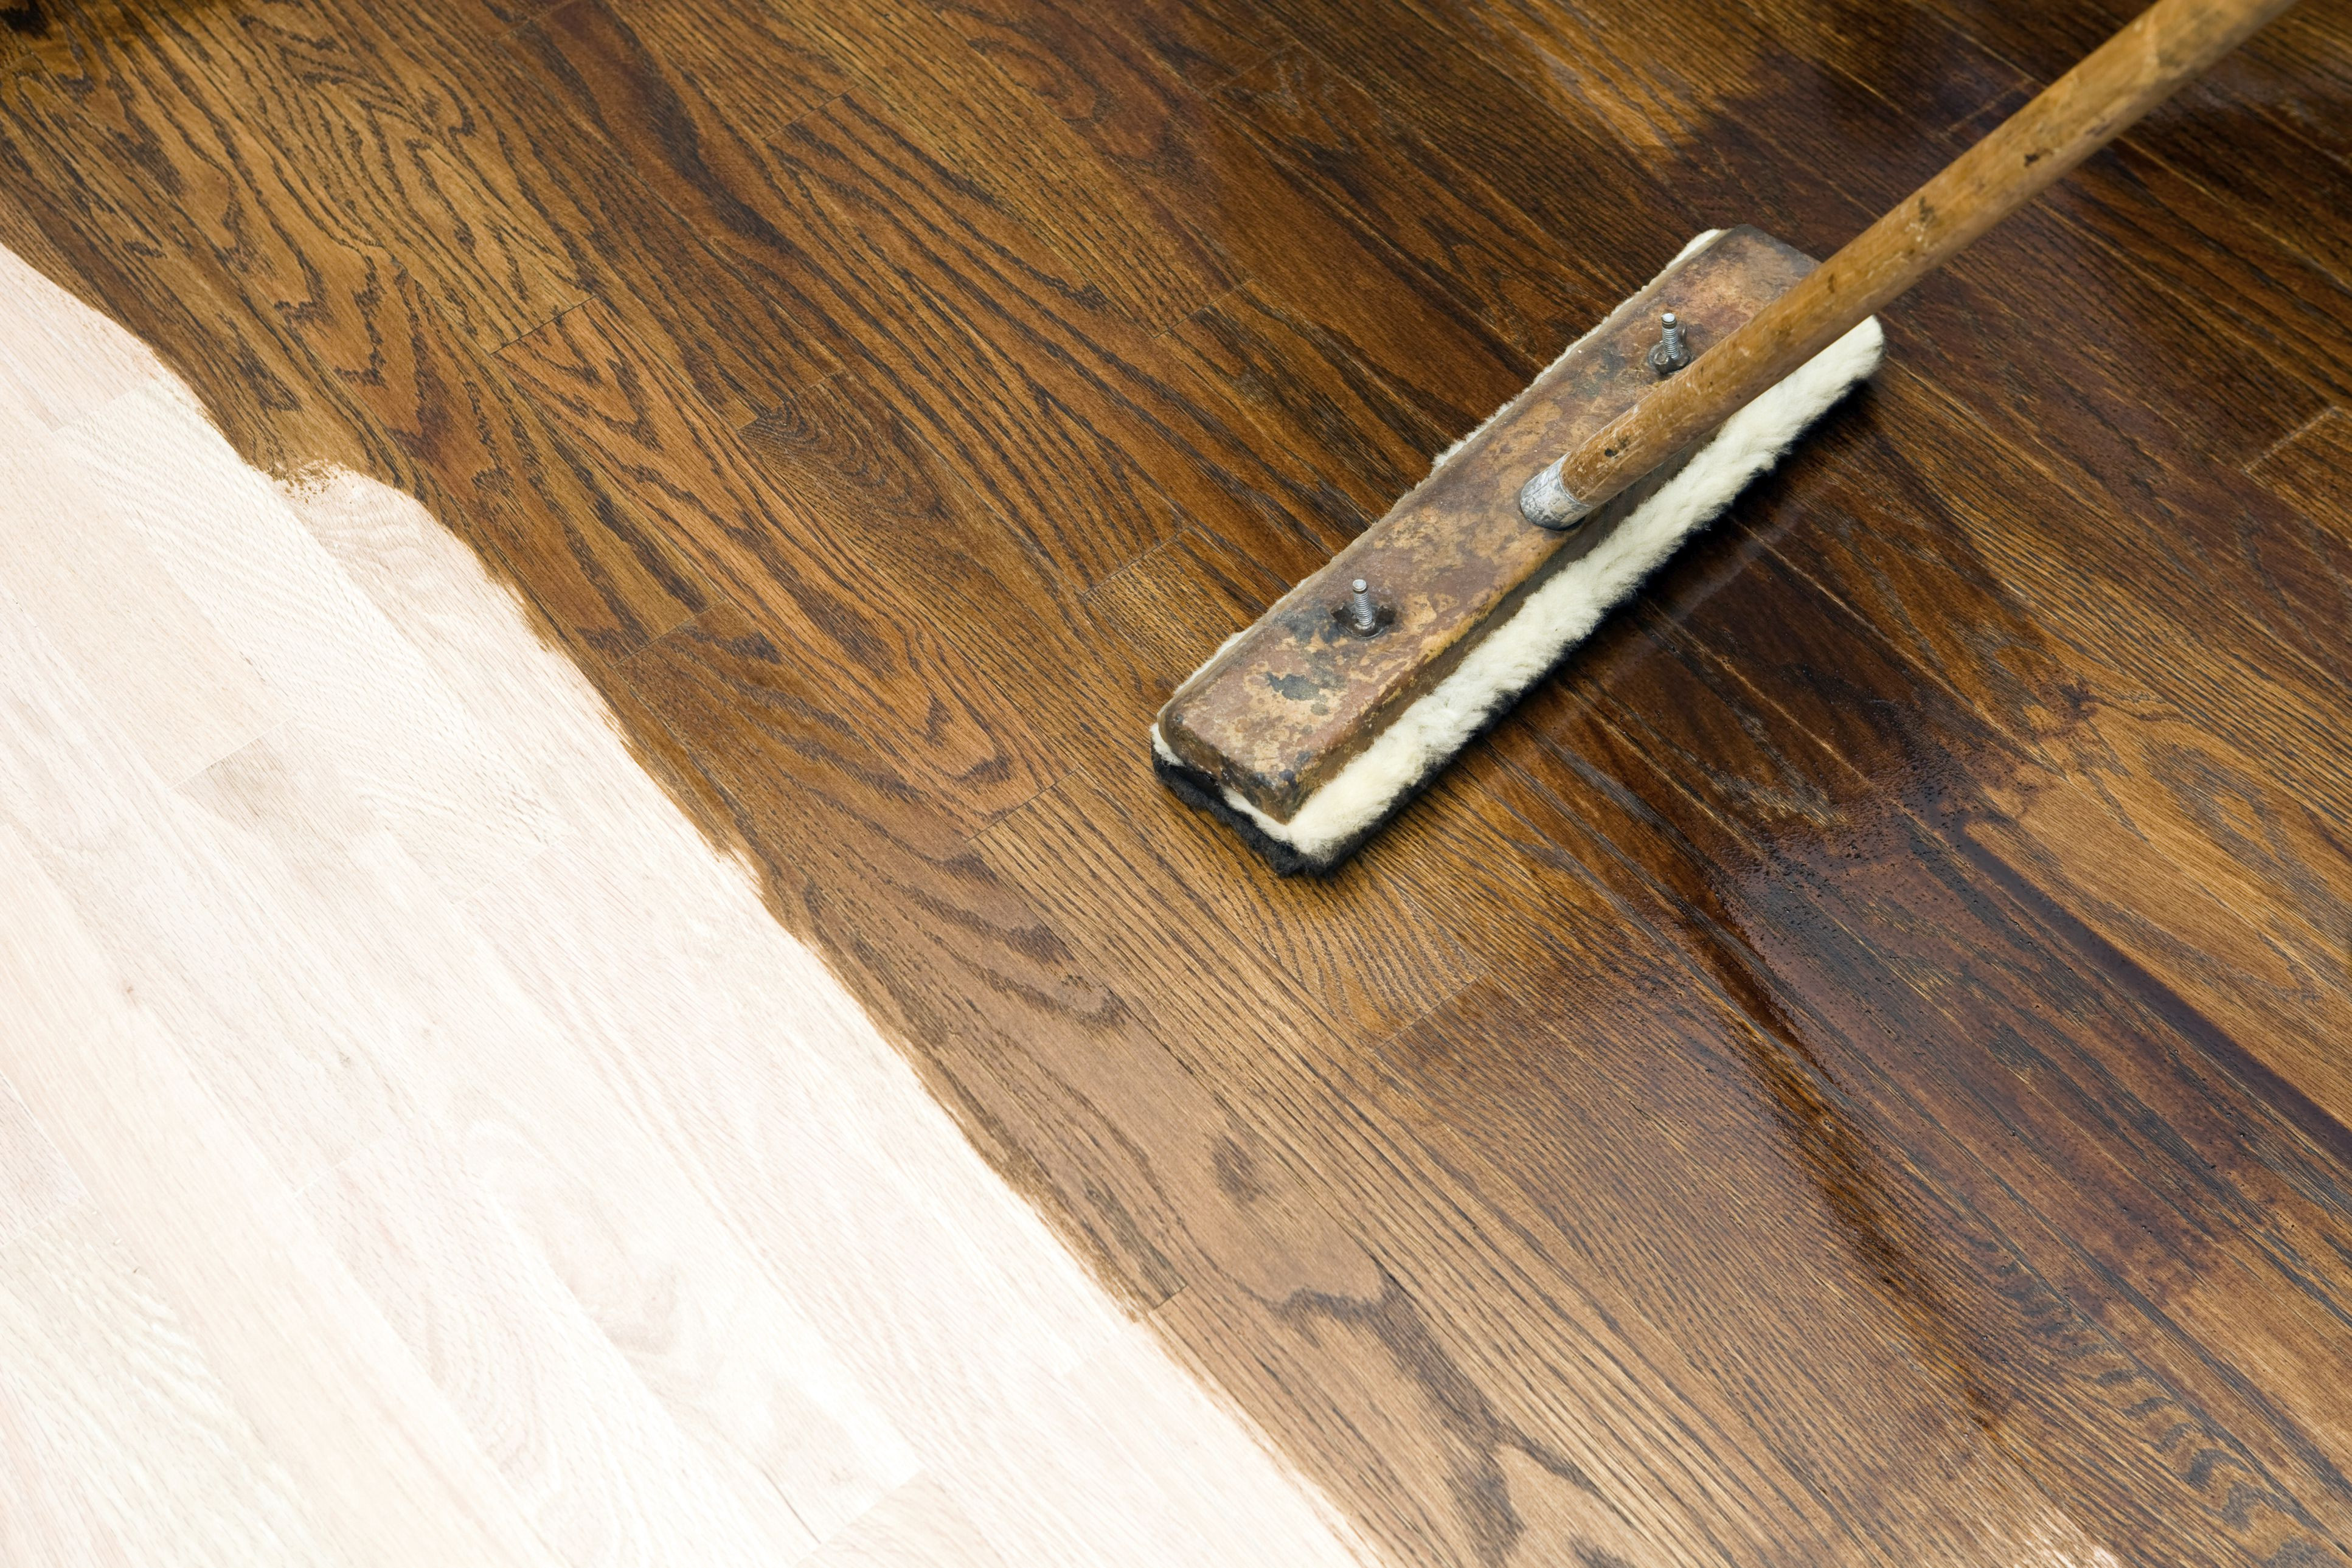 mercier hardwood flooring prices of how to build equity what it means to own more of your home regarding dark stain application on new oak hardwood floor 184881406 573e139f5f9b58723d7a472d